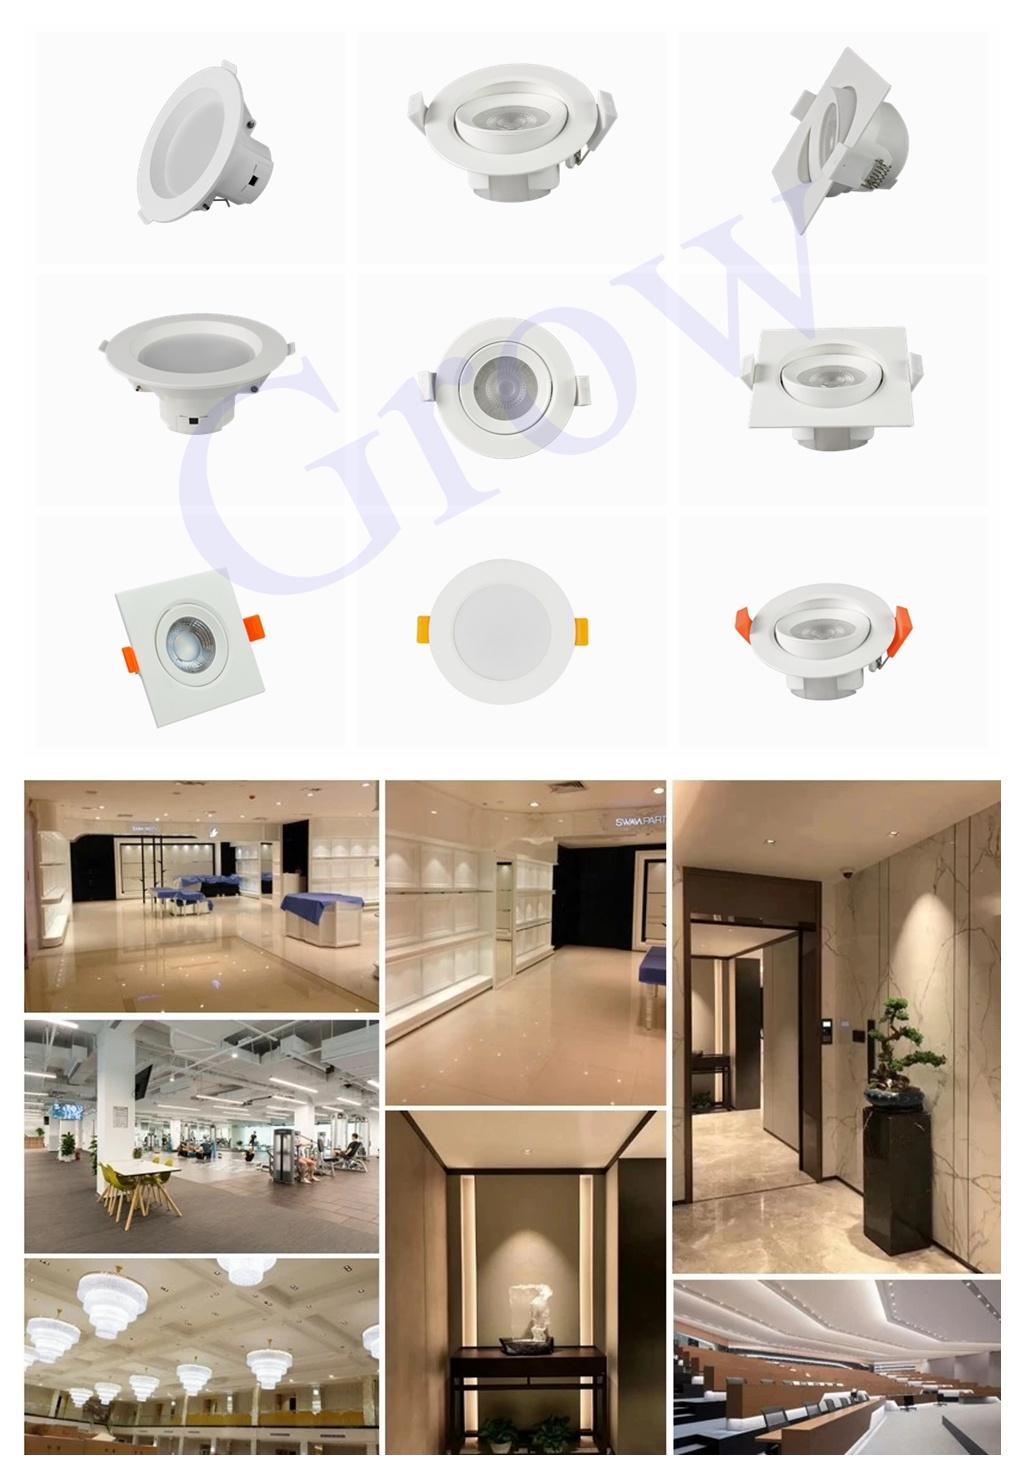 12W High Power Indoor LED Square Ceiling Spot Lamp Recessed LED Downlight